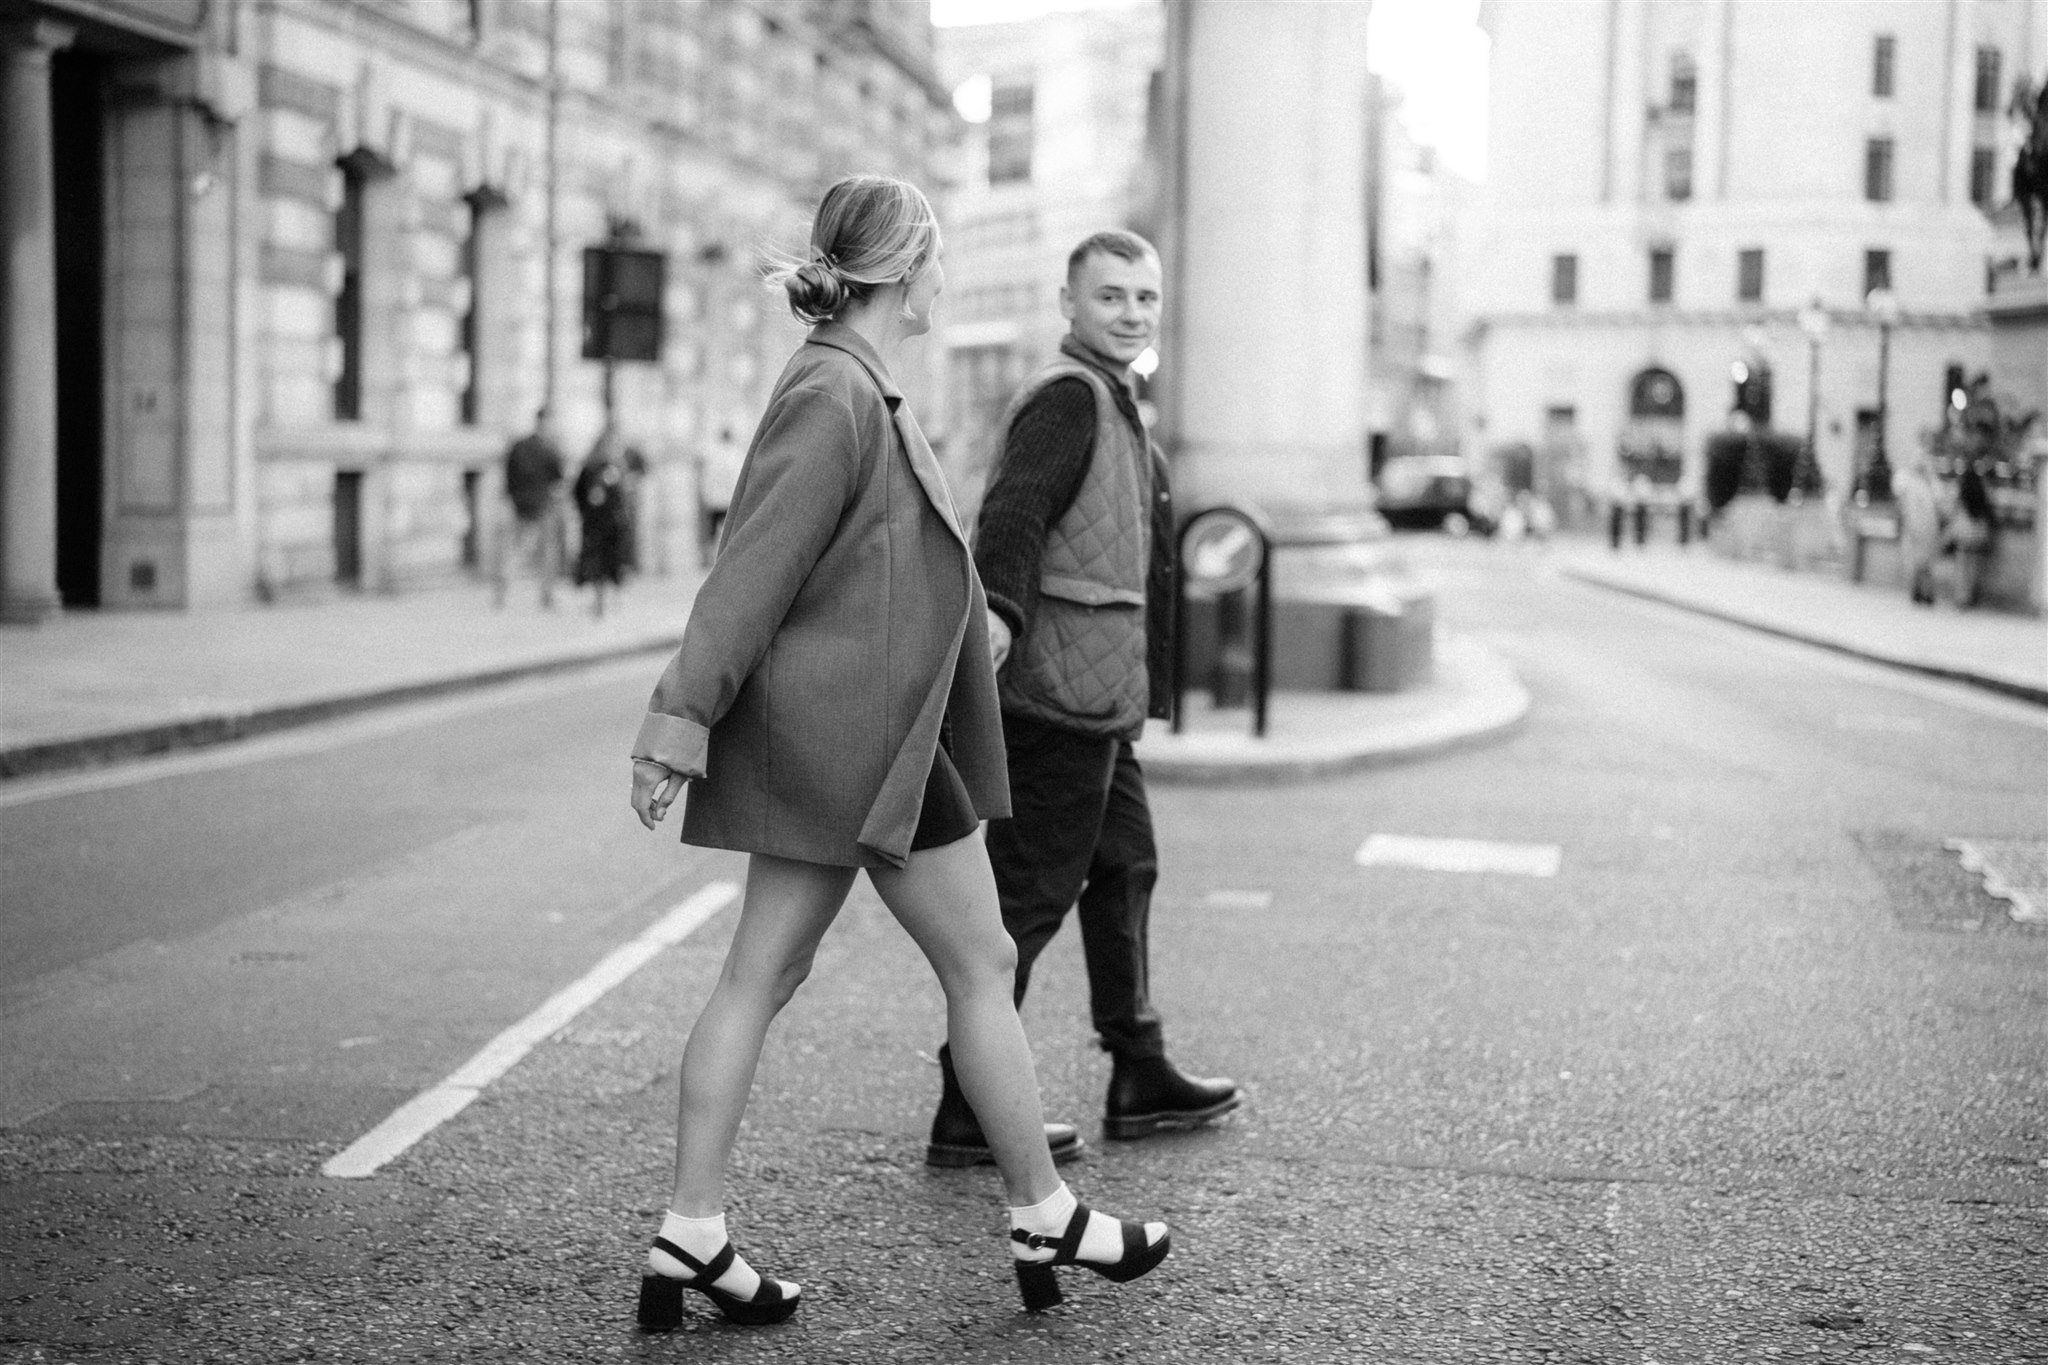 Engagement photoshoot in Bank, London